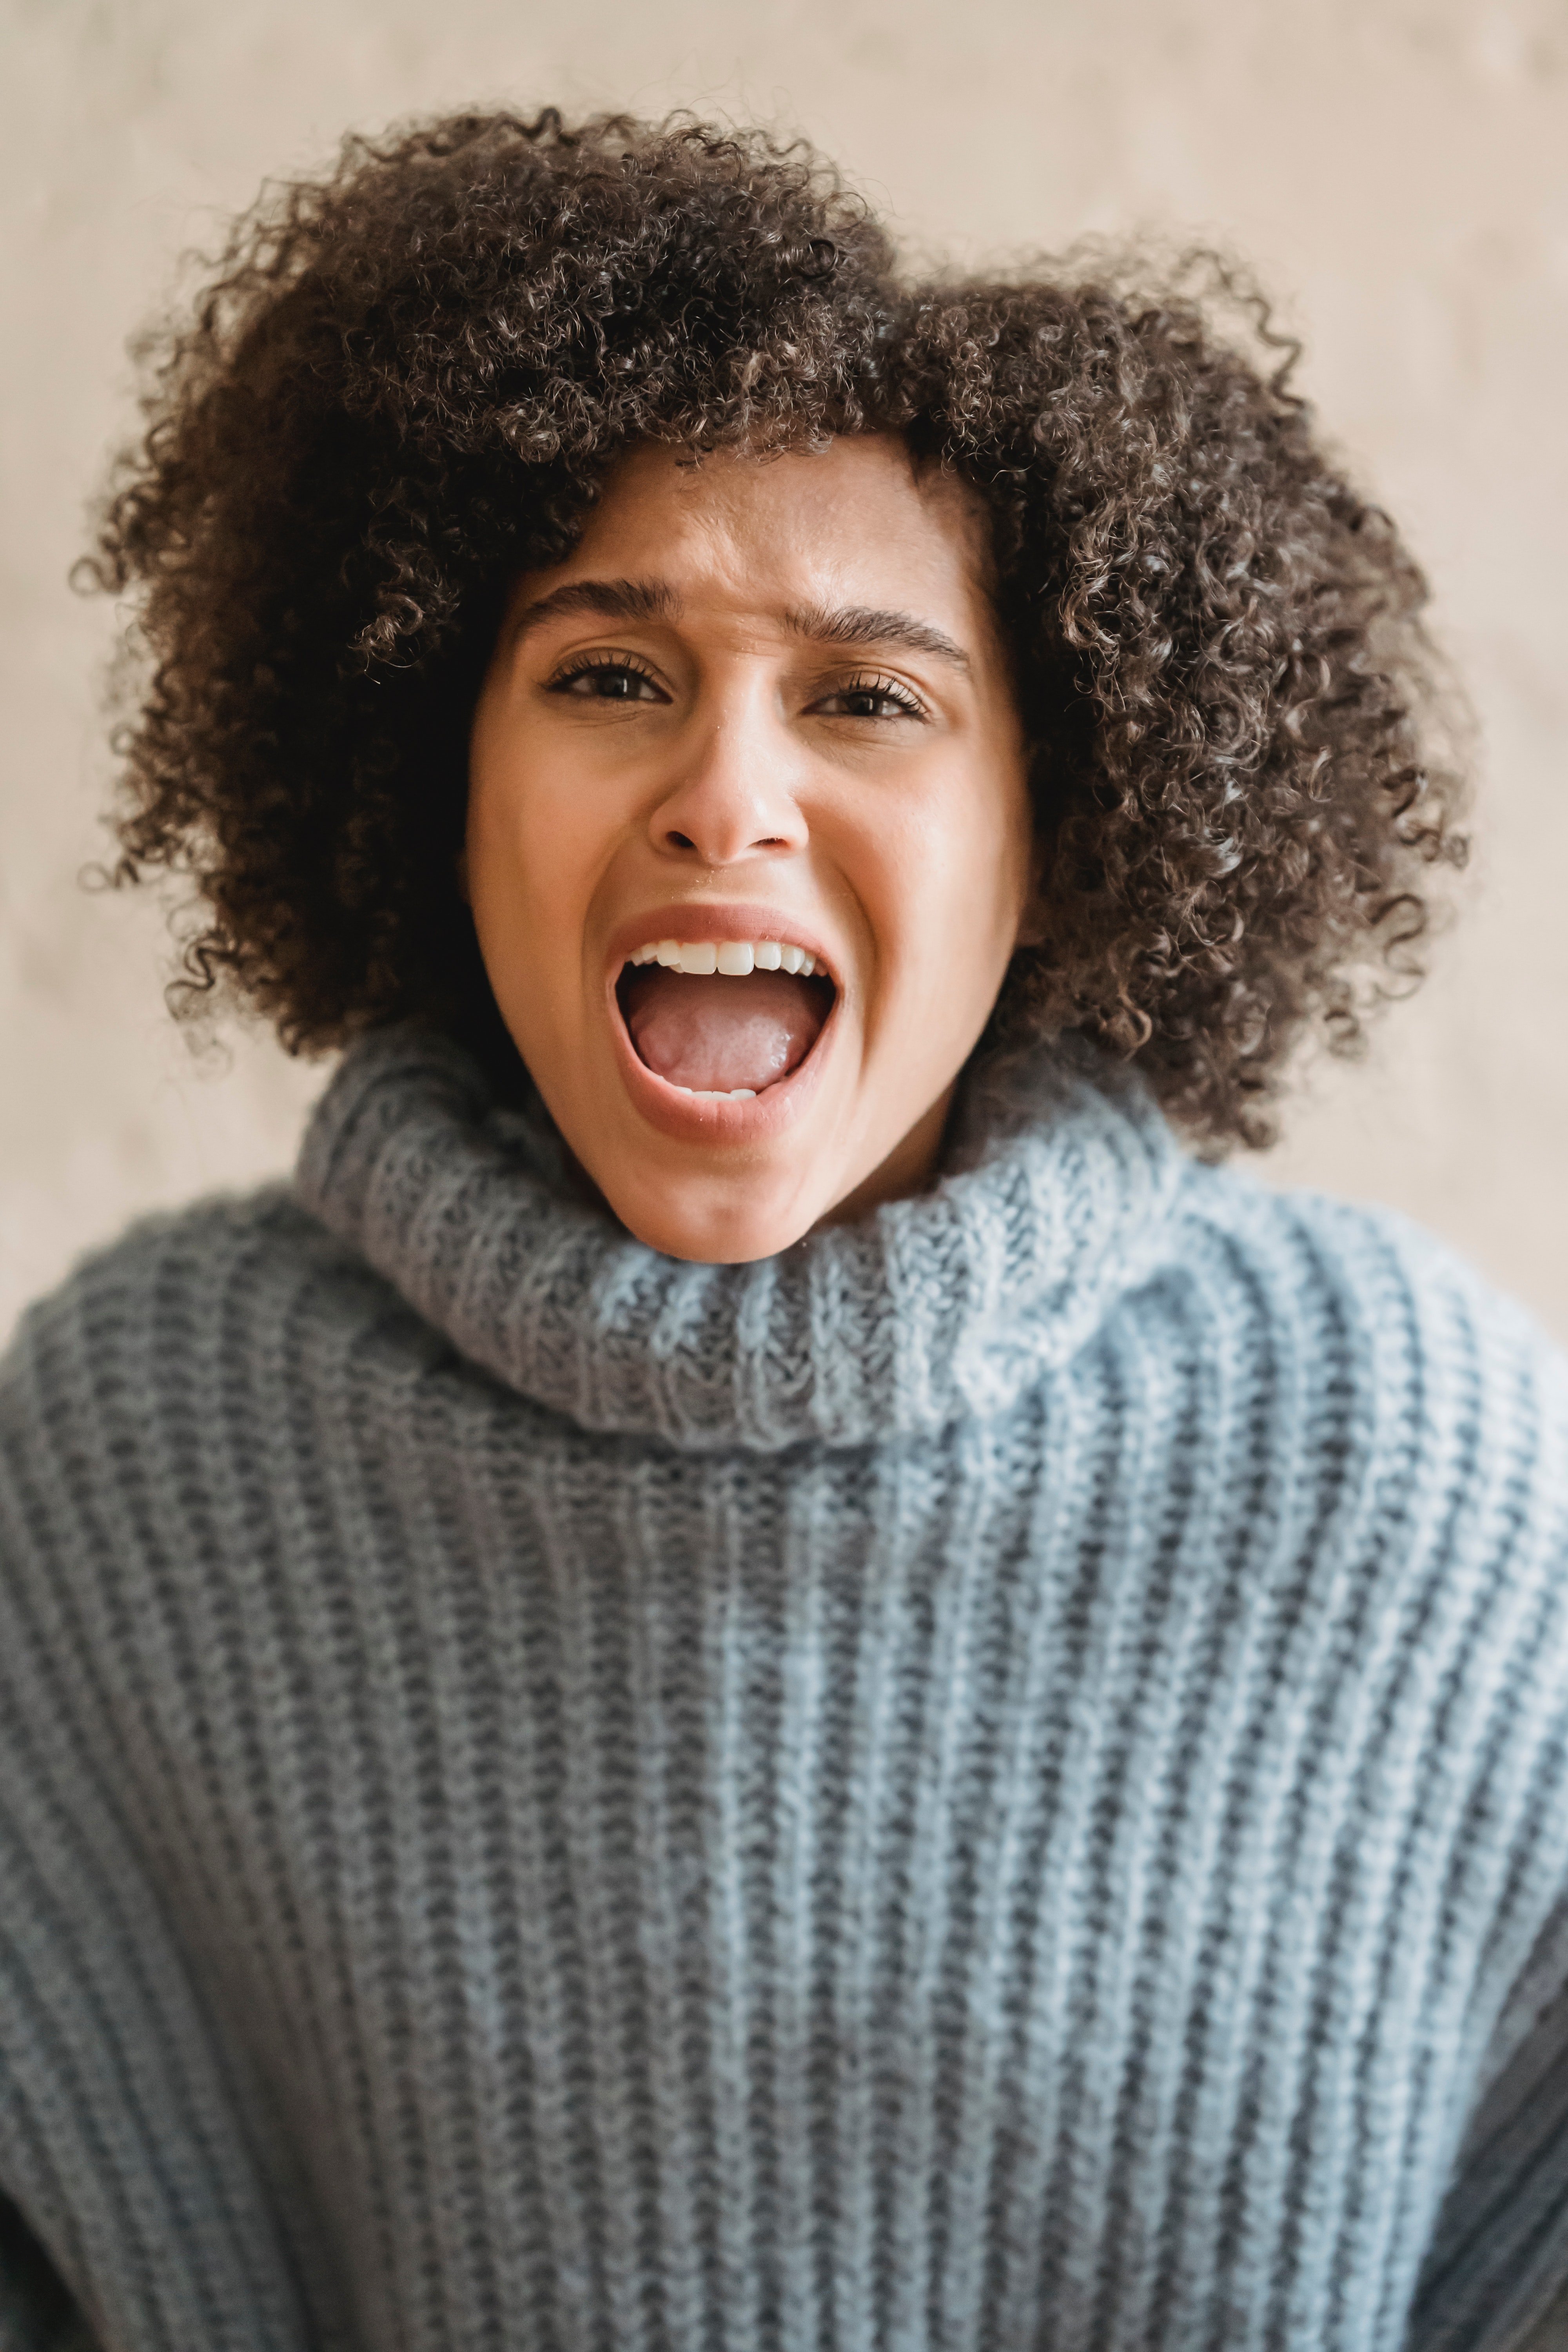 Woman in a gray knit sweater yelling | Source: Pexels